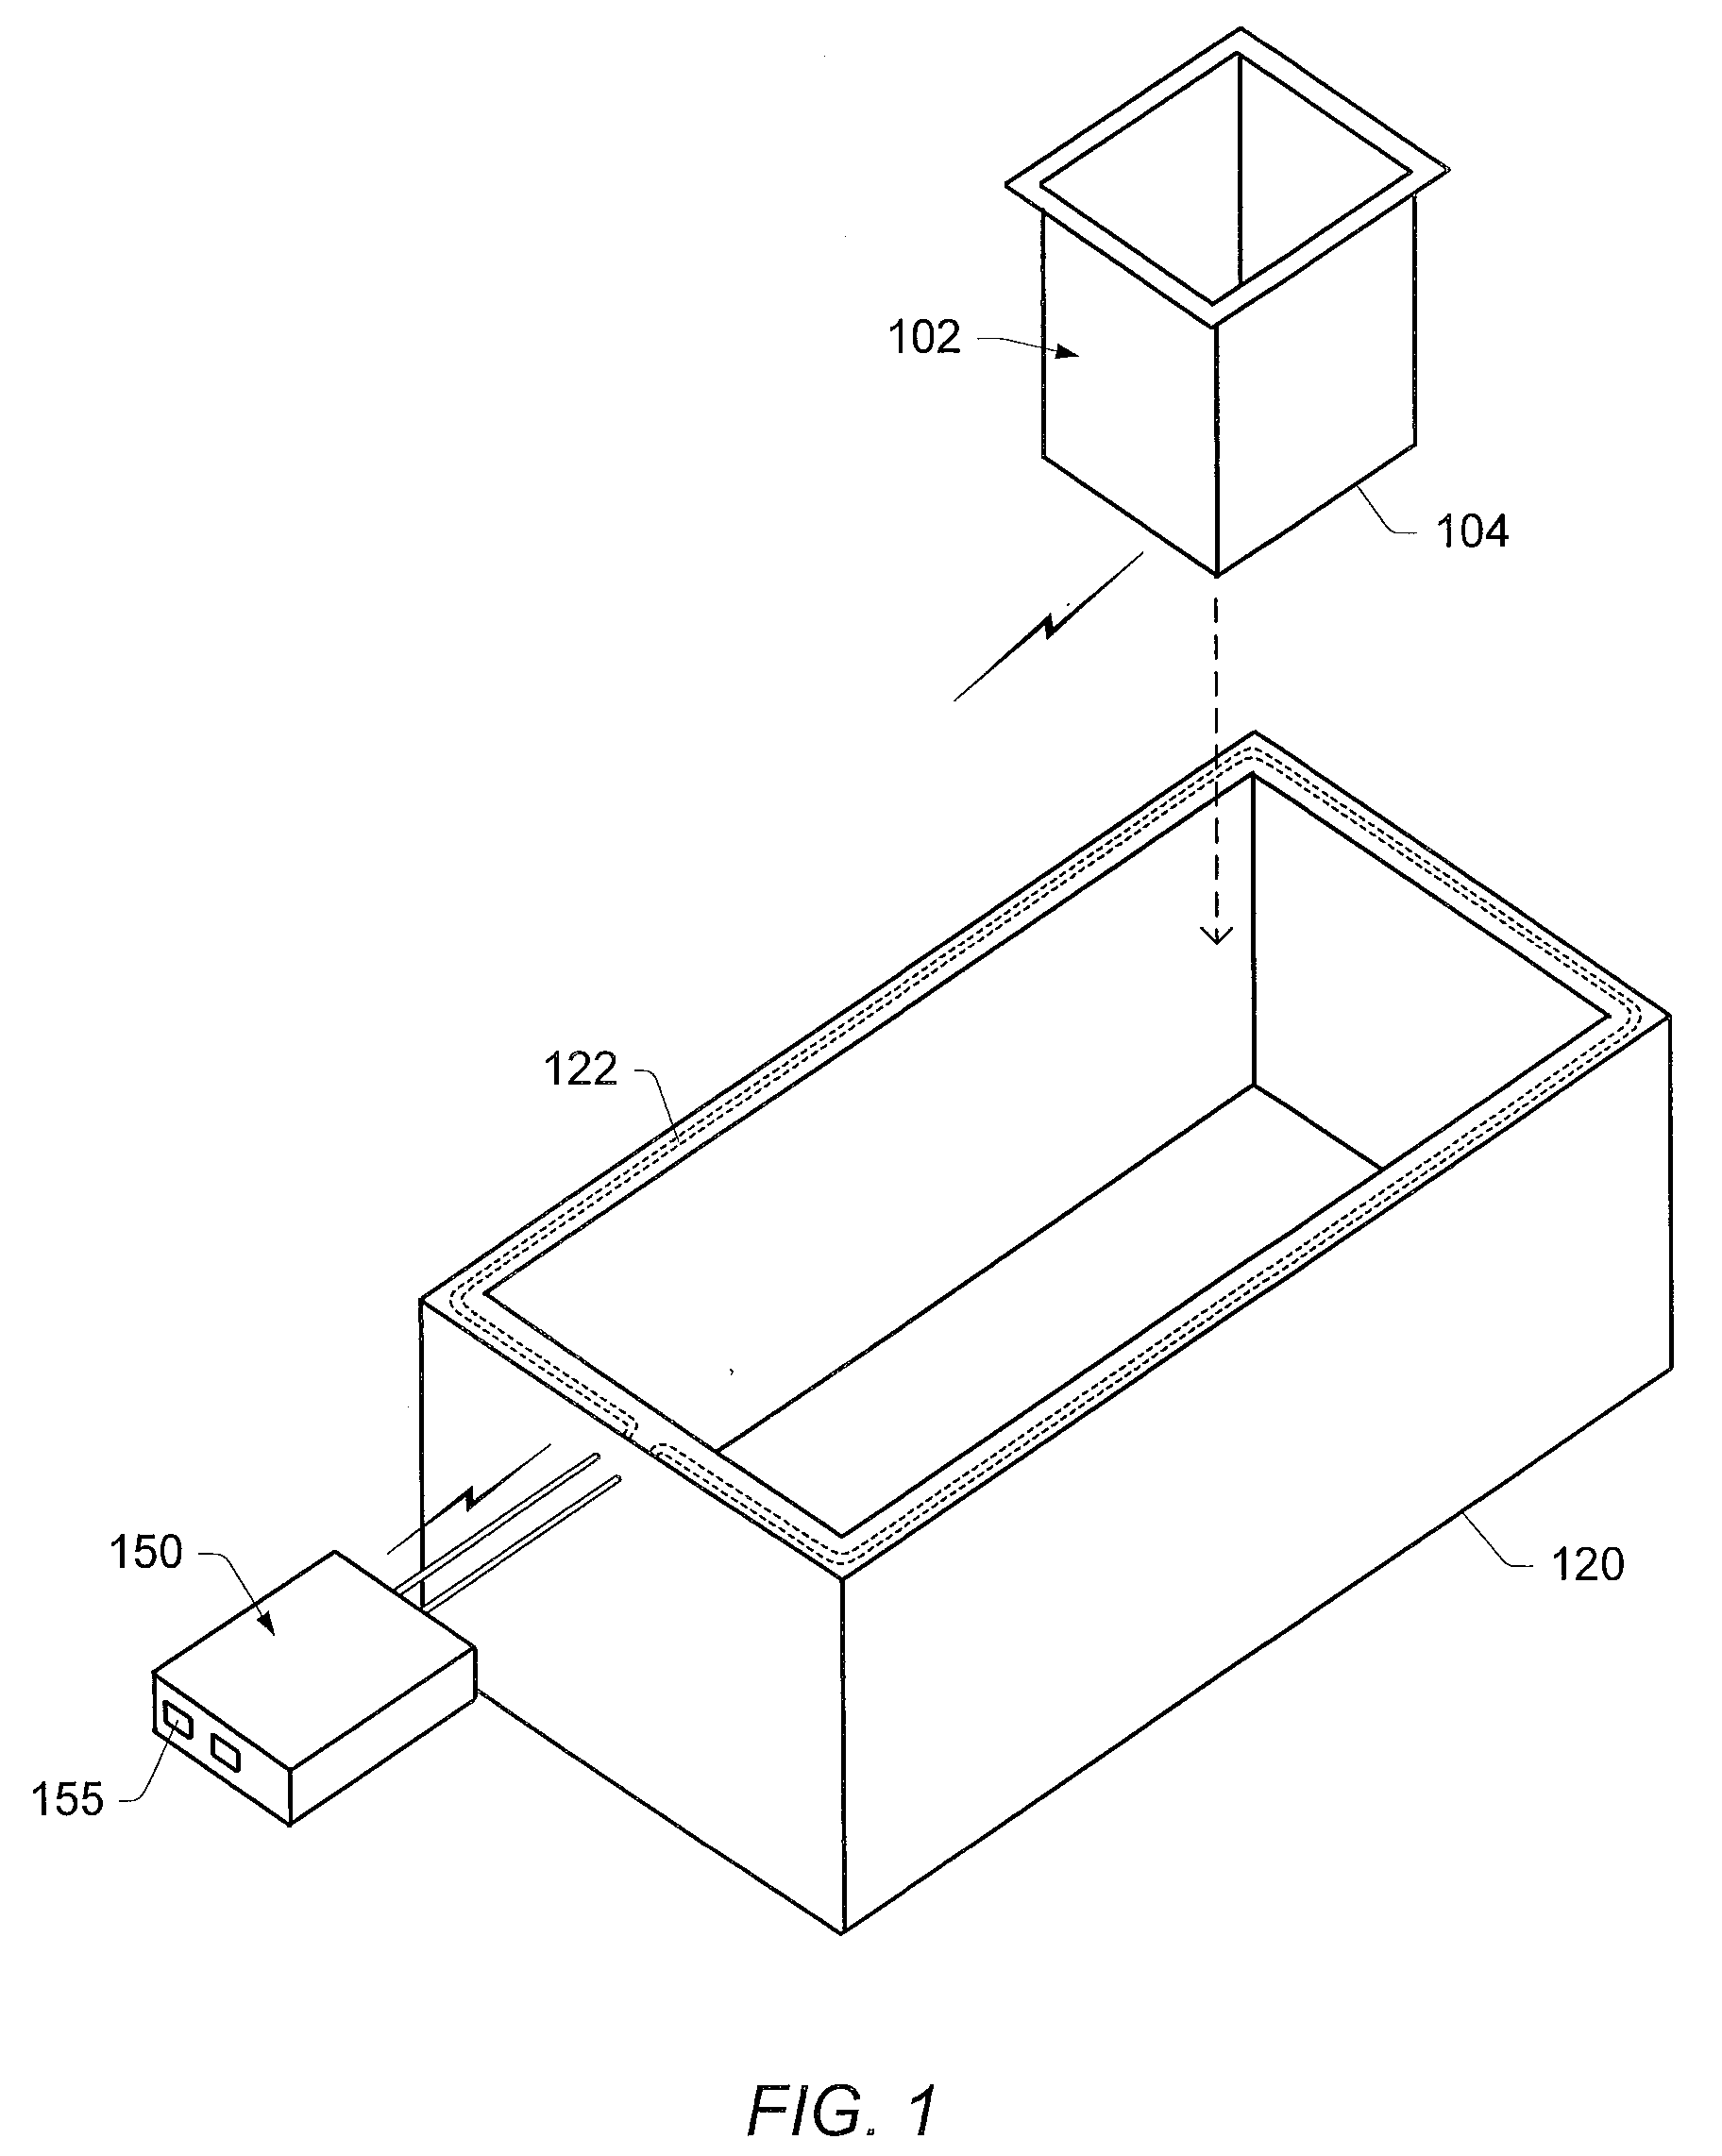 System and Method for Food Service Storage Bin Monitoring